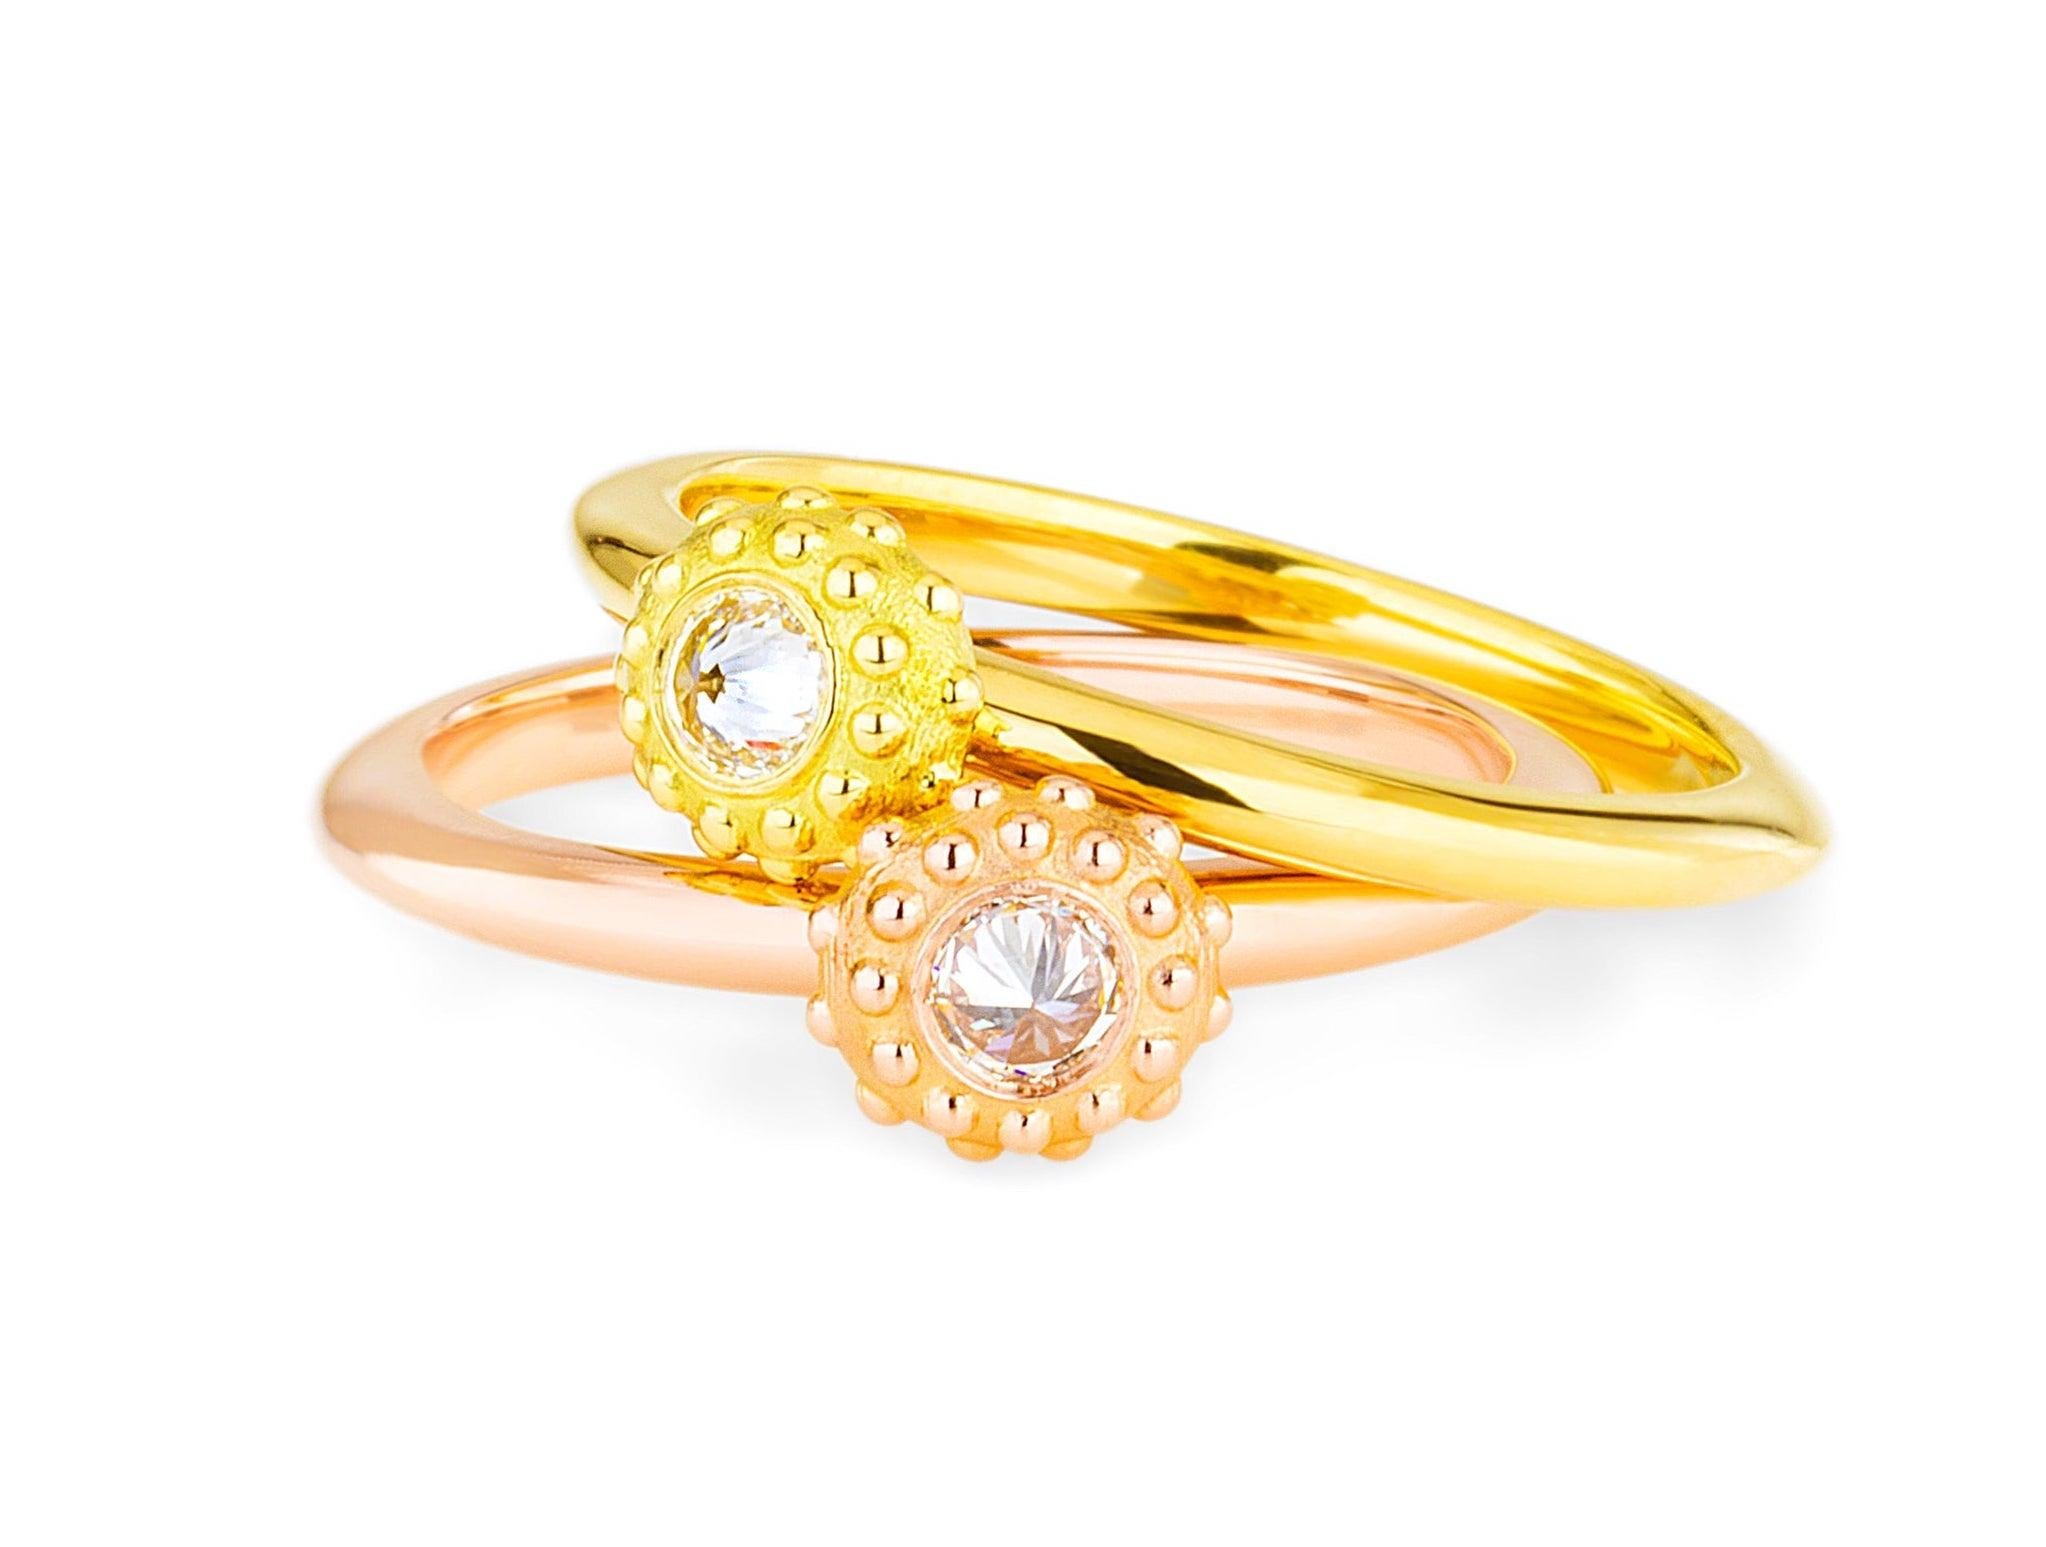 For Sale:  AnaKatarina Rose Gold and Diamond 'Evolution' Stacking Ring 5